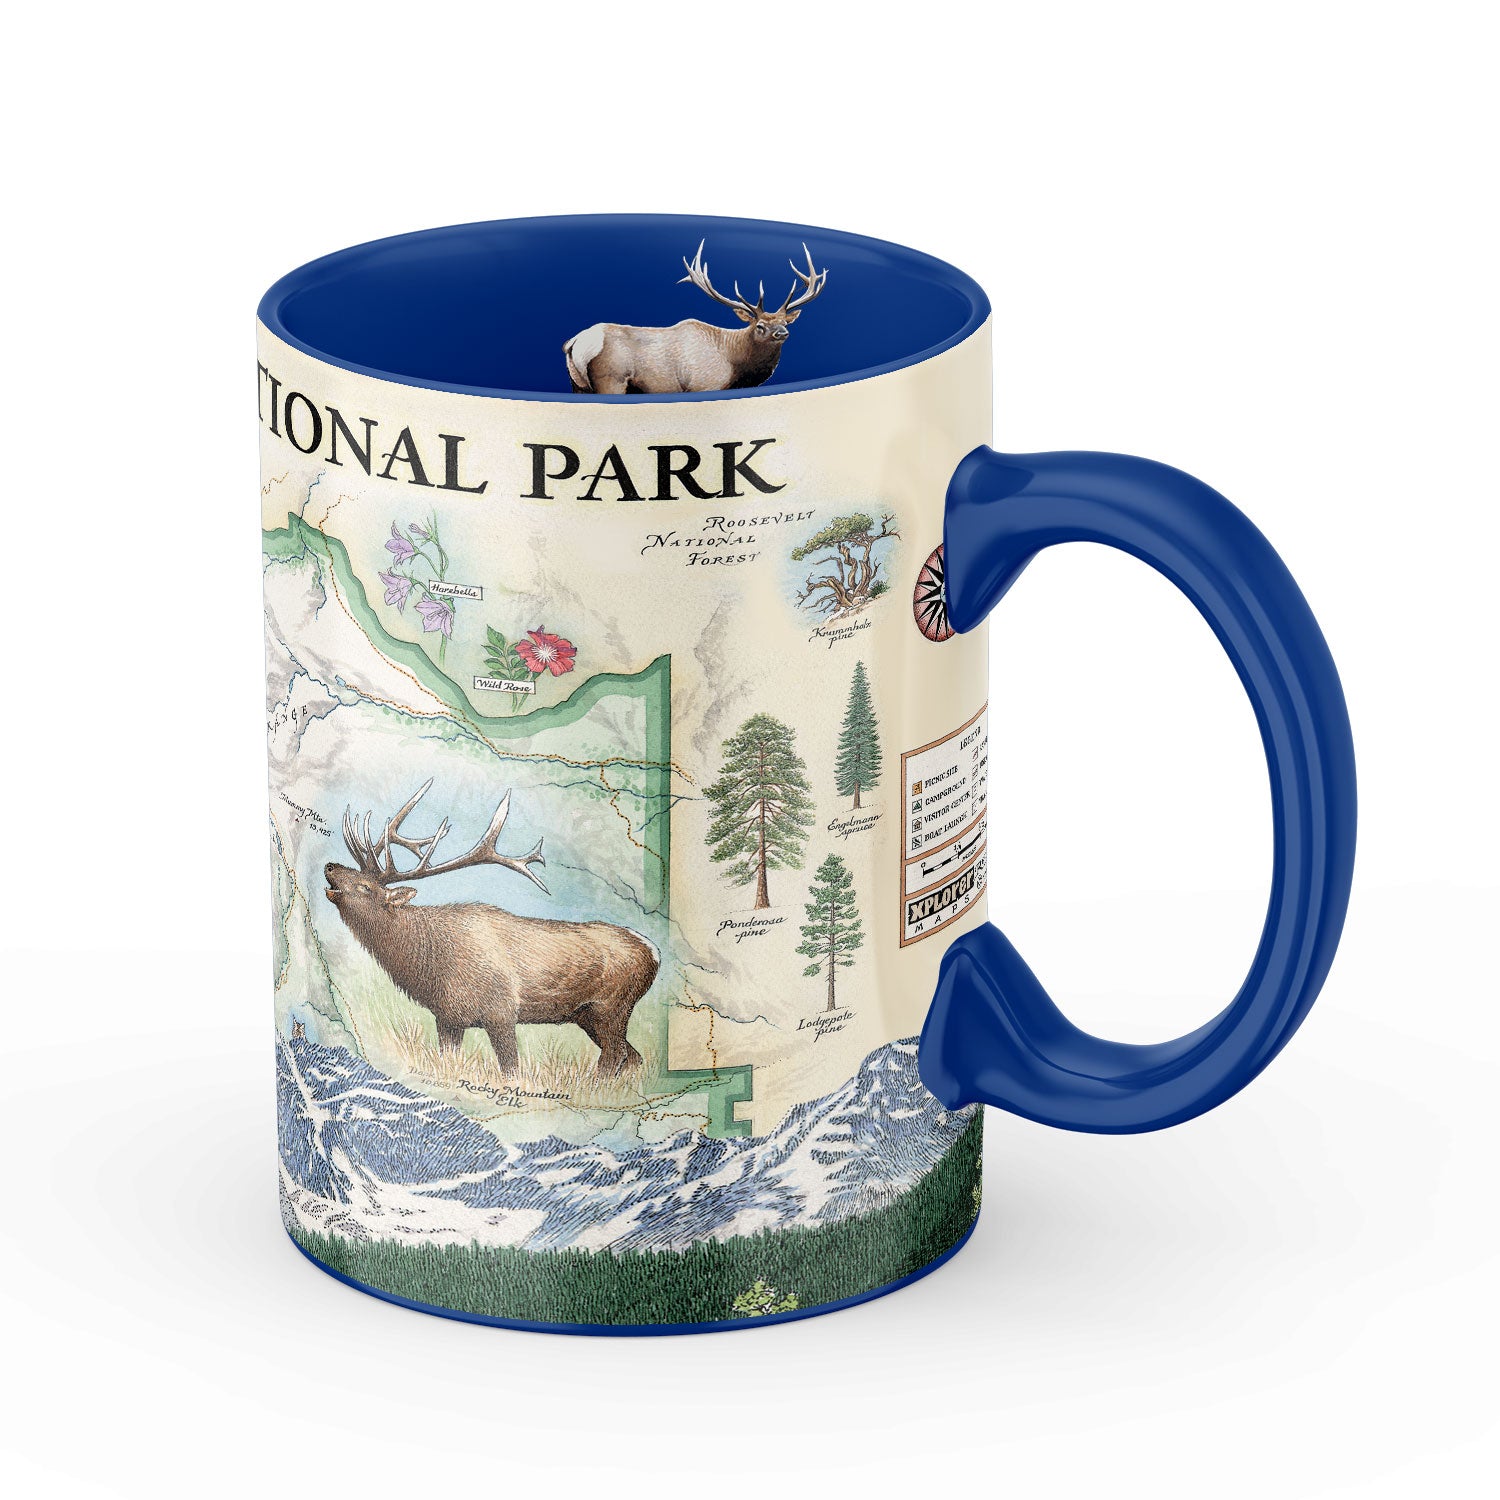 Blue 16 oz Rocky Mountain National Park Map Ceramic Mug. The map features illustrations of places like Trail Ridge Road, Mount Ganby, Estes Park, and the Alpine Visitor Center. Flora and fauna include bobcats, snowshoe hares, Indian paintbrushes, and wild roses. 